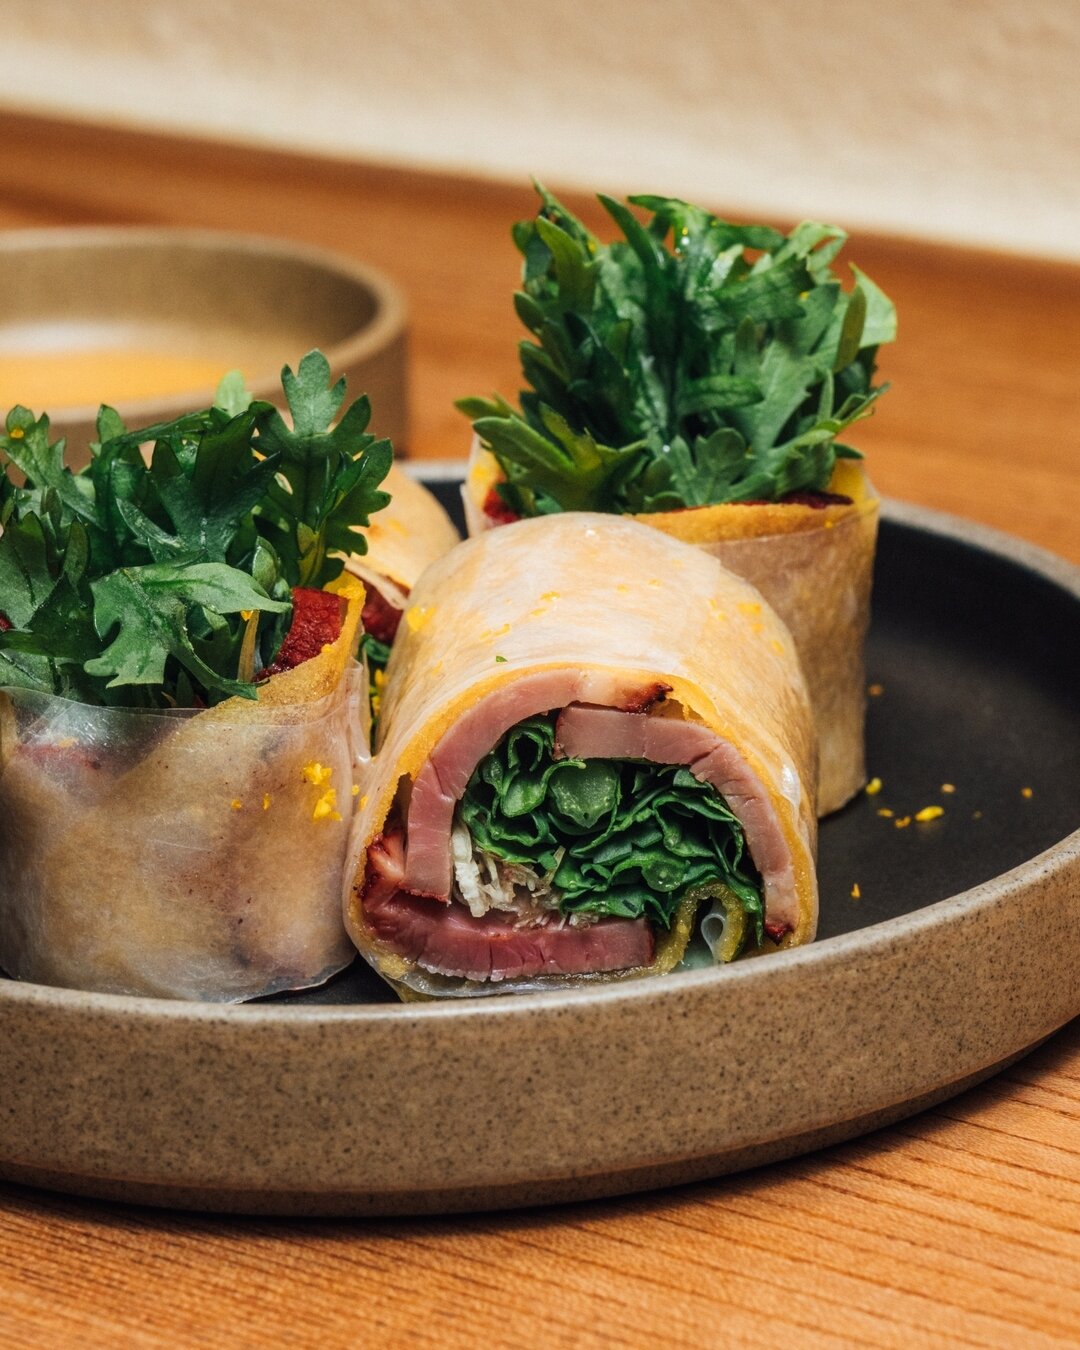 We thought the duck must be bored of being confit&rsquo;d for centuries so we rolled it up and made it edible with your hands. You&rsquo;re welcome.